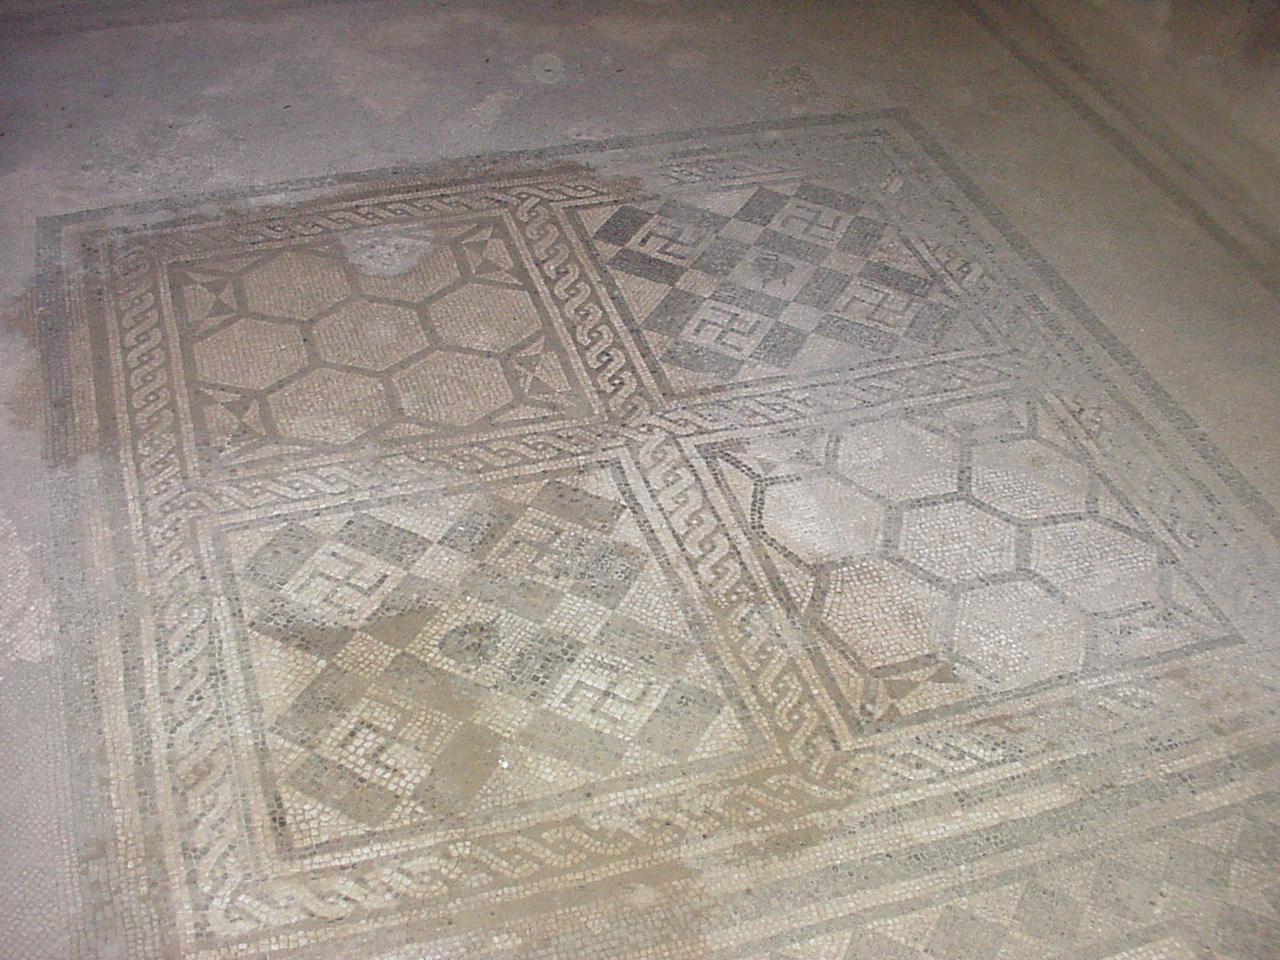 Fine tiled floor found in one of the more prestigious dwellings.